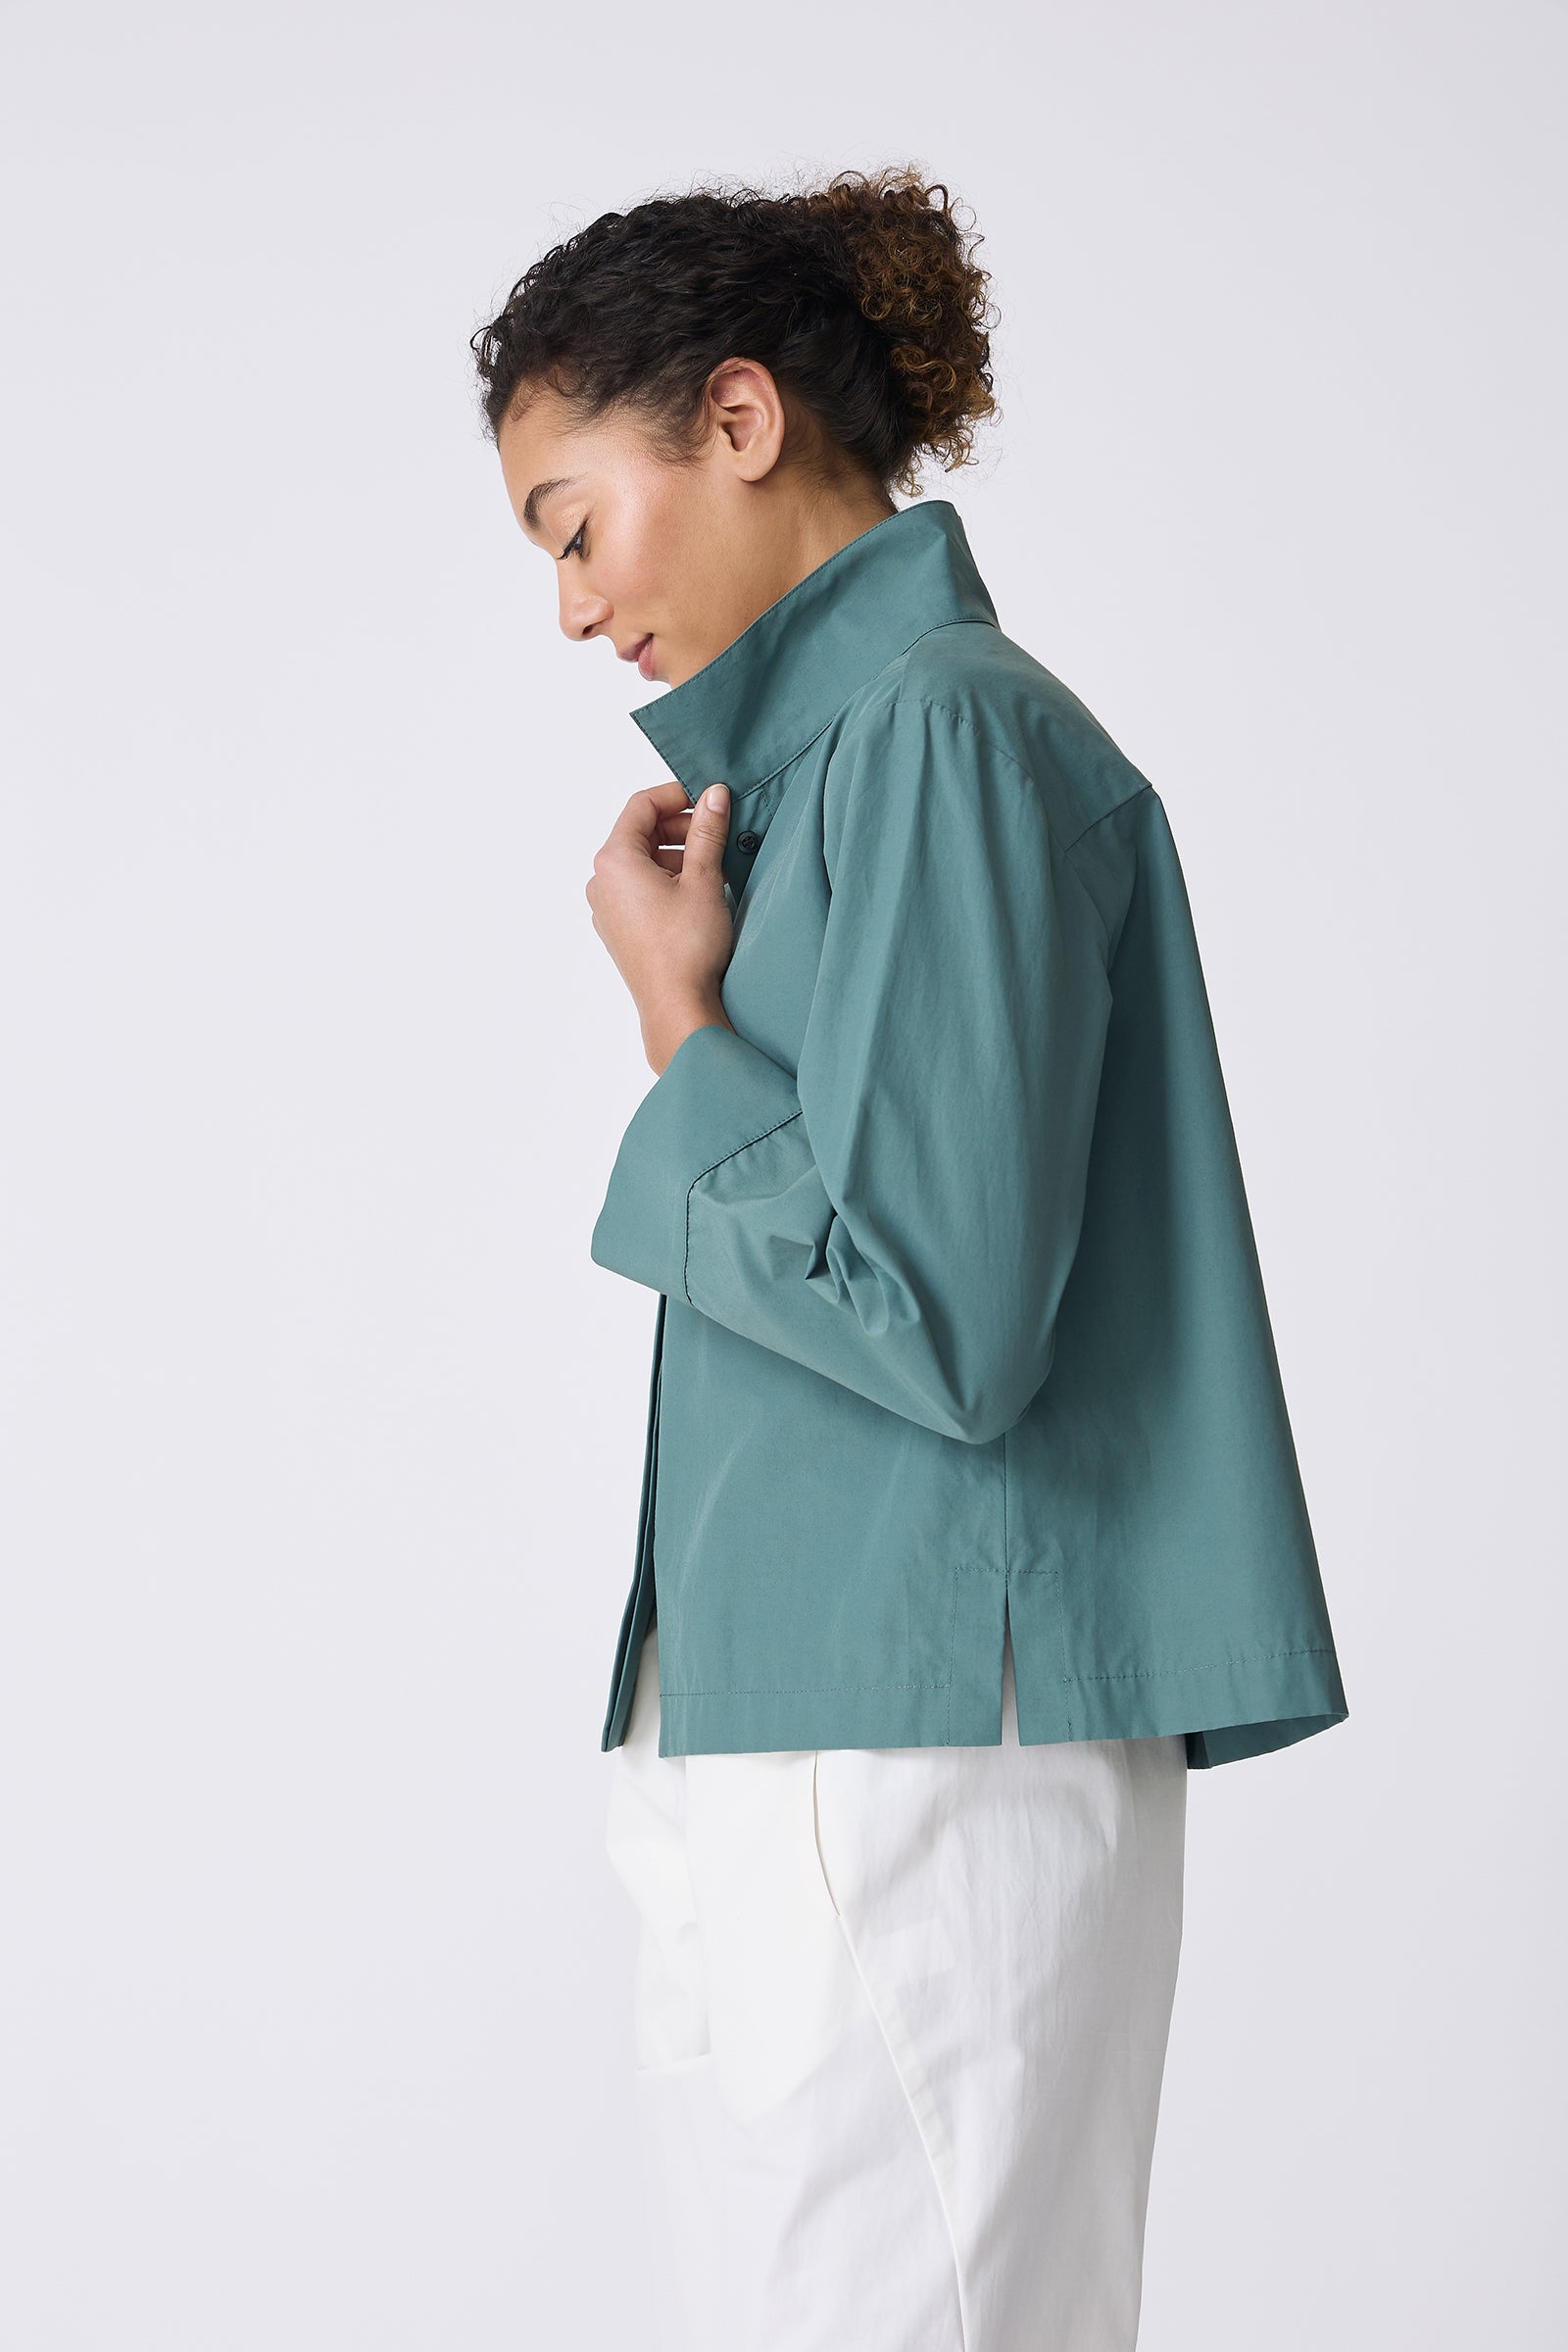 Kal Rieman Peggy Collared Shirt in Sage on model side view